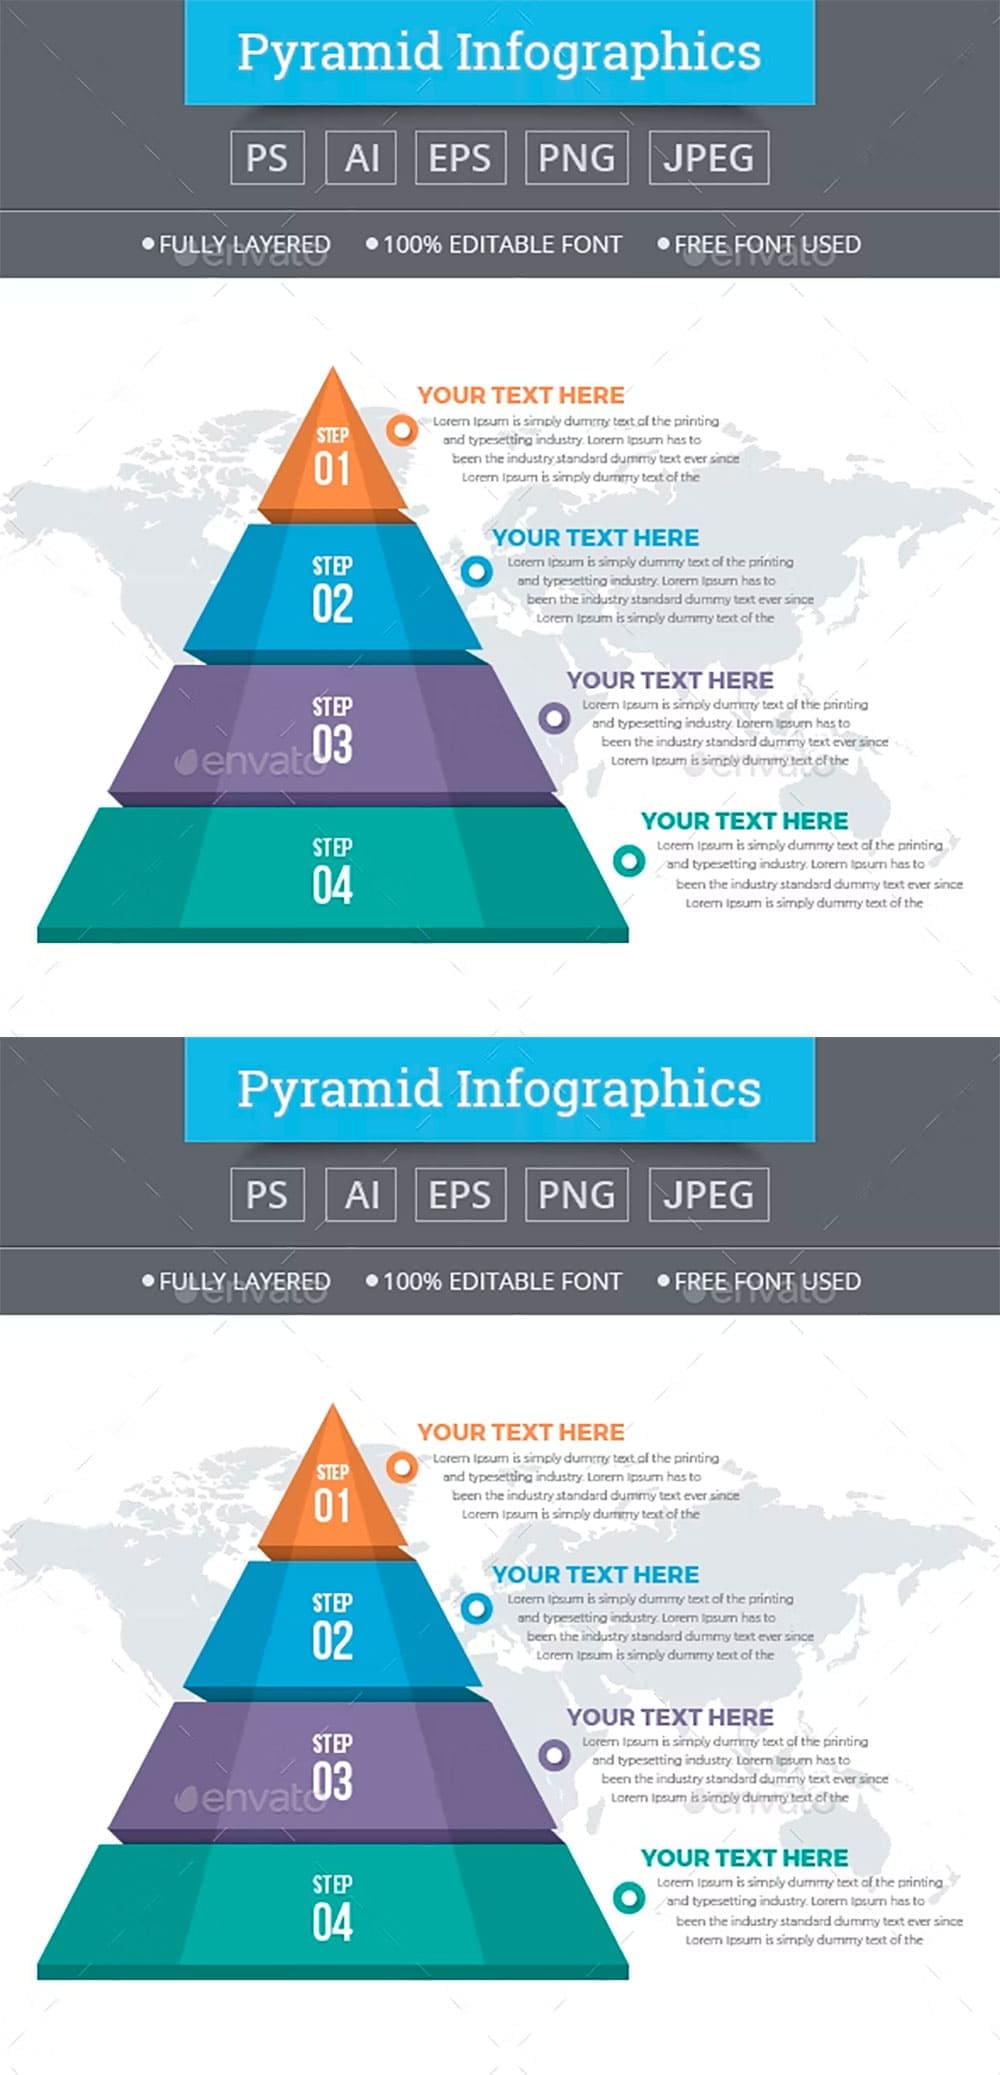 Pyramid infographics, picture for pinterest.